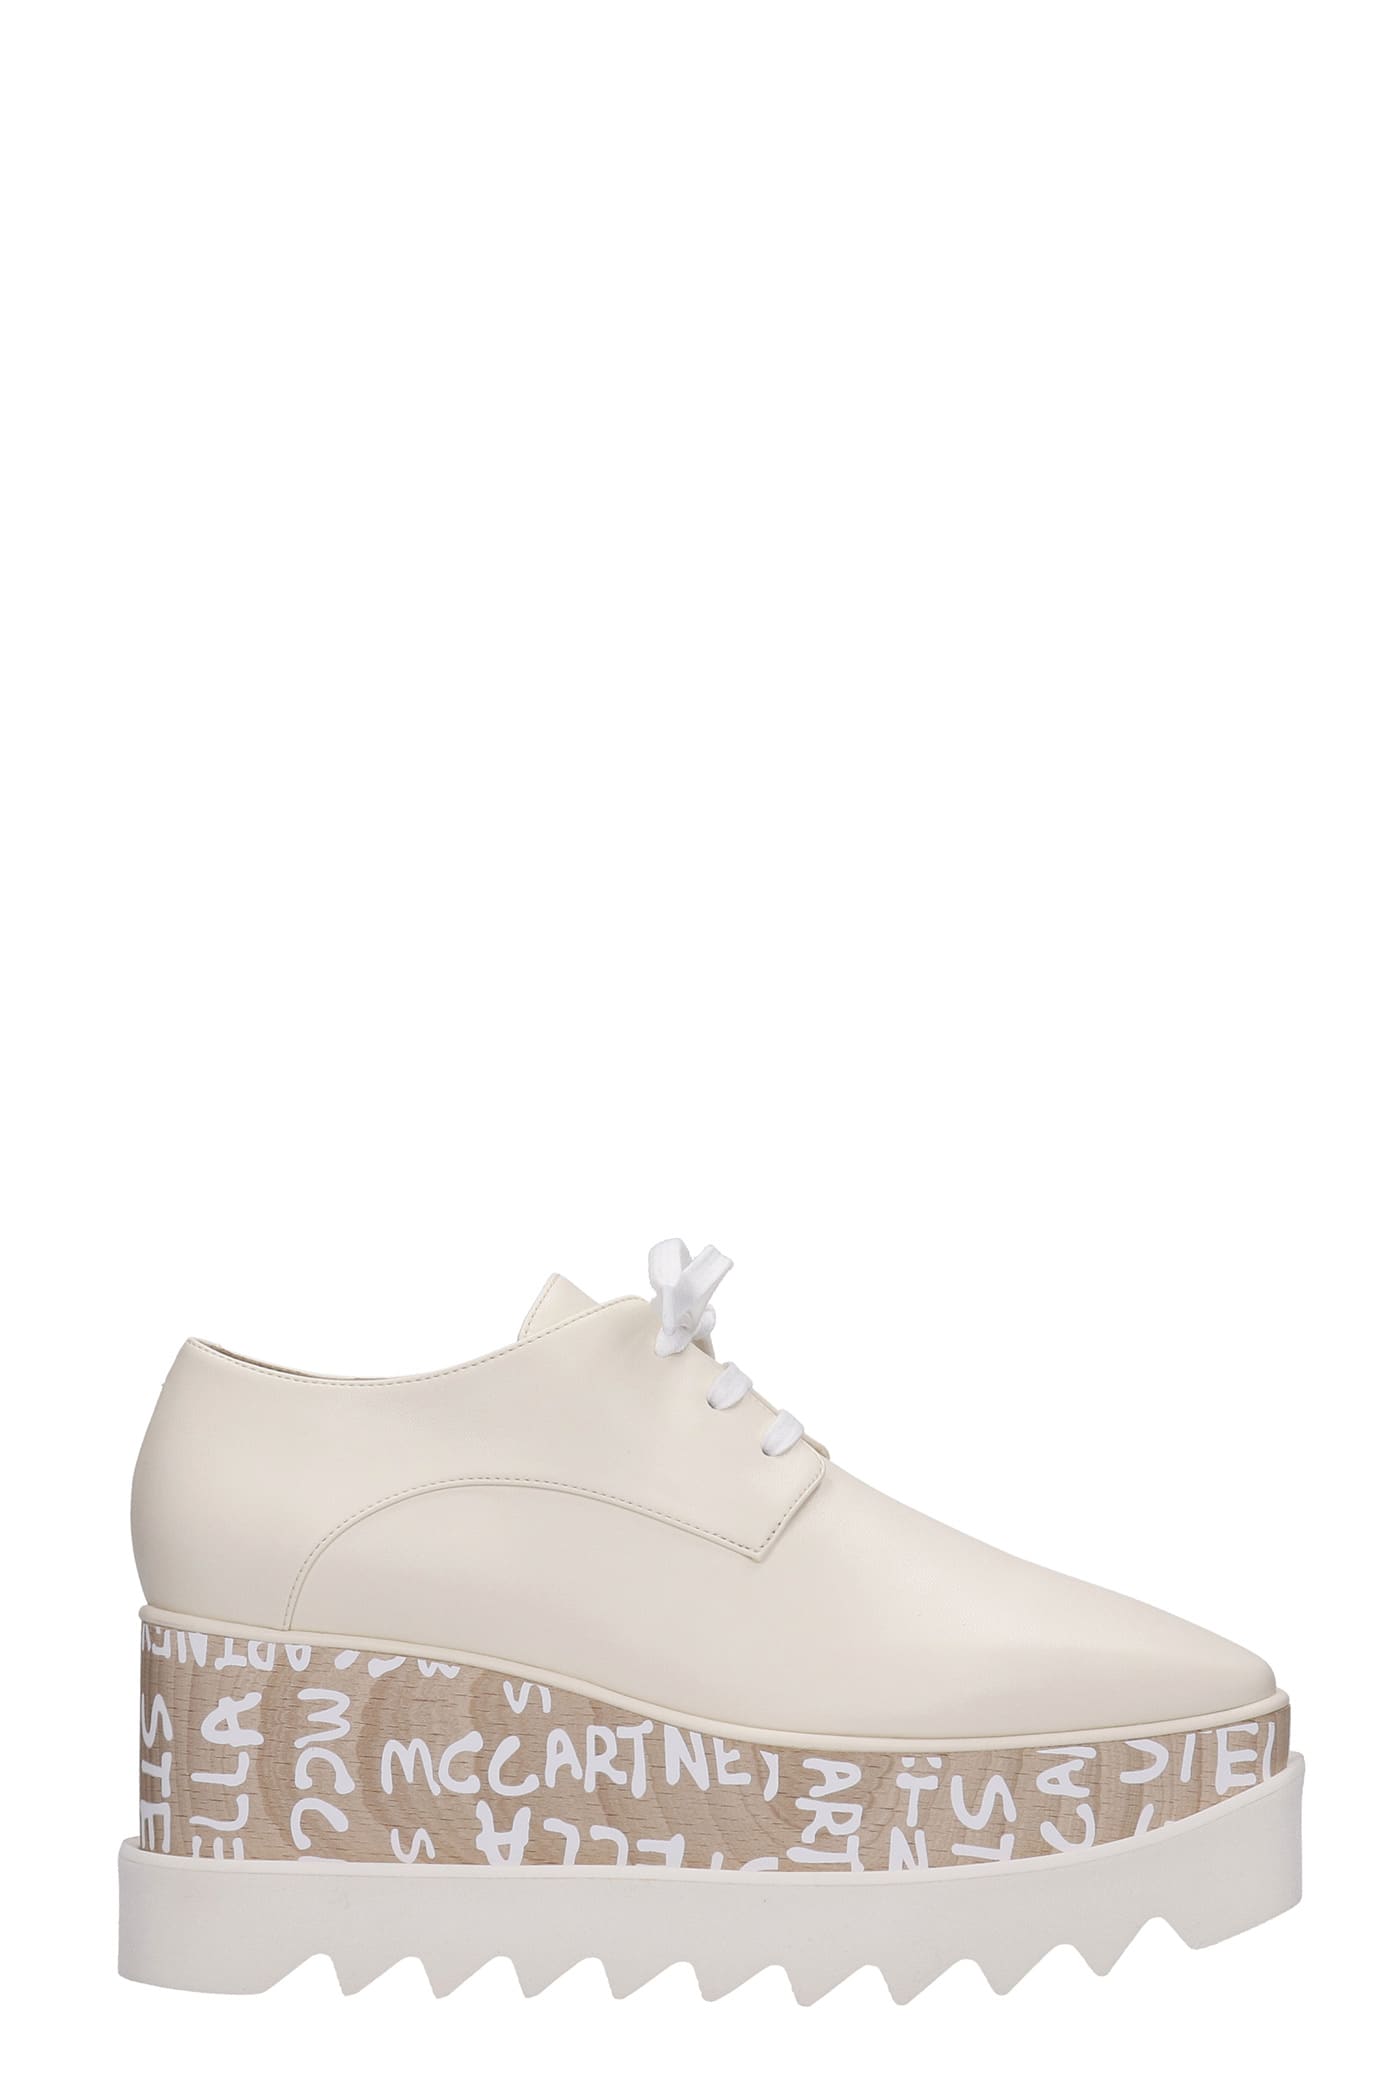 Stella McCartney Lace Up Shoes In Beige Faux Leather